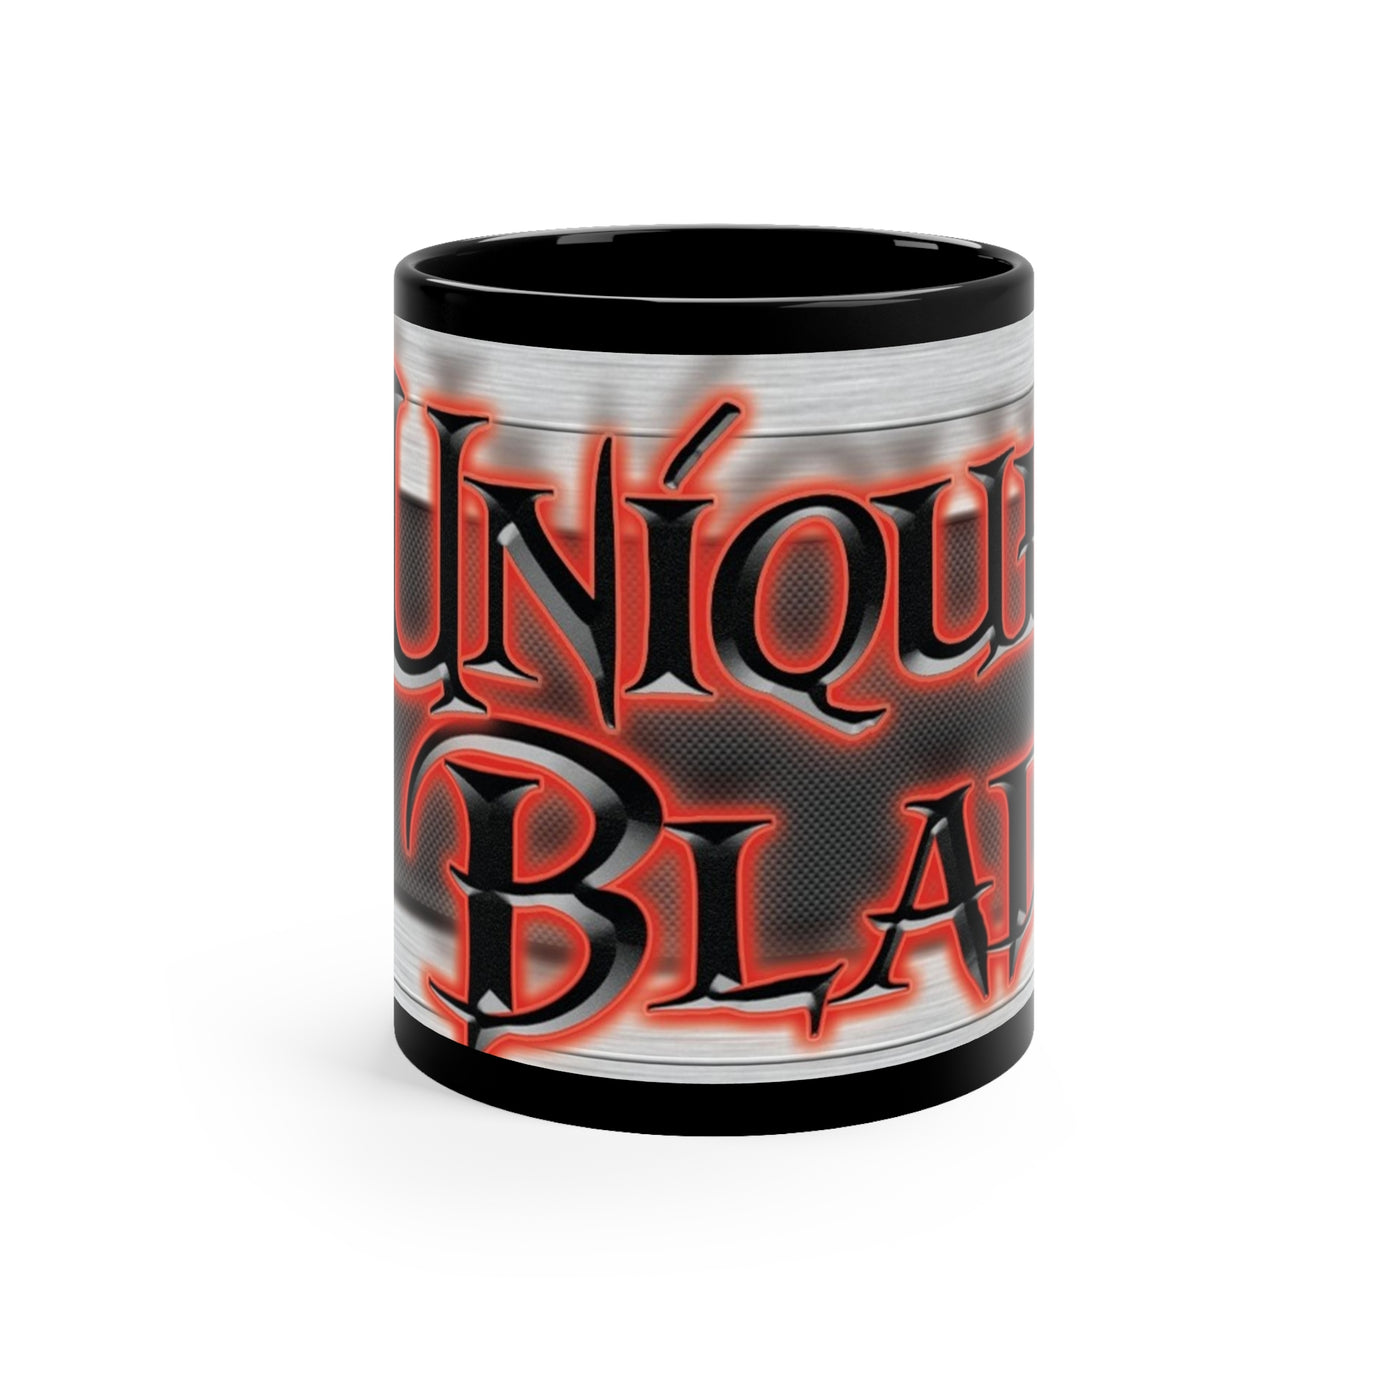  11oz Black Mug - Standard-sized black ceramic mug suitable for beverages, ideal for daily use or personalized gifting